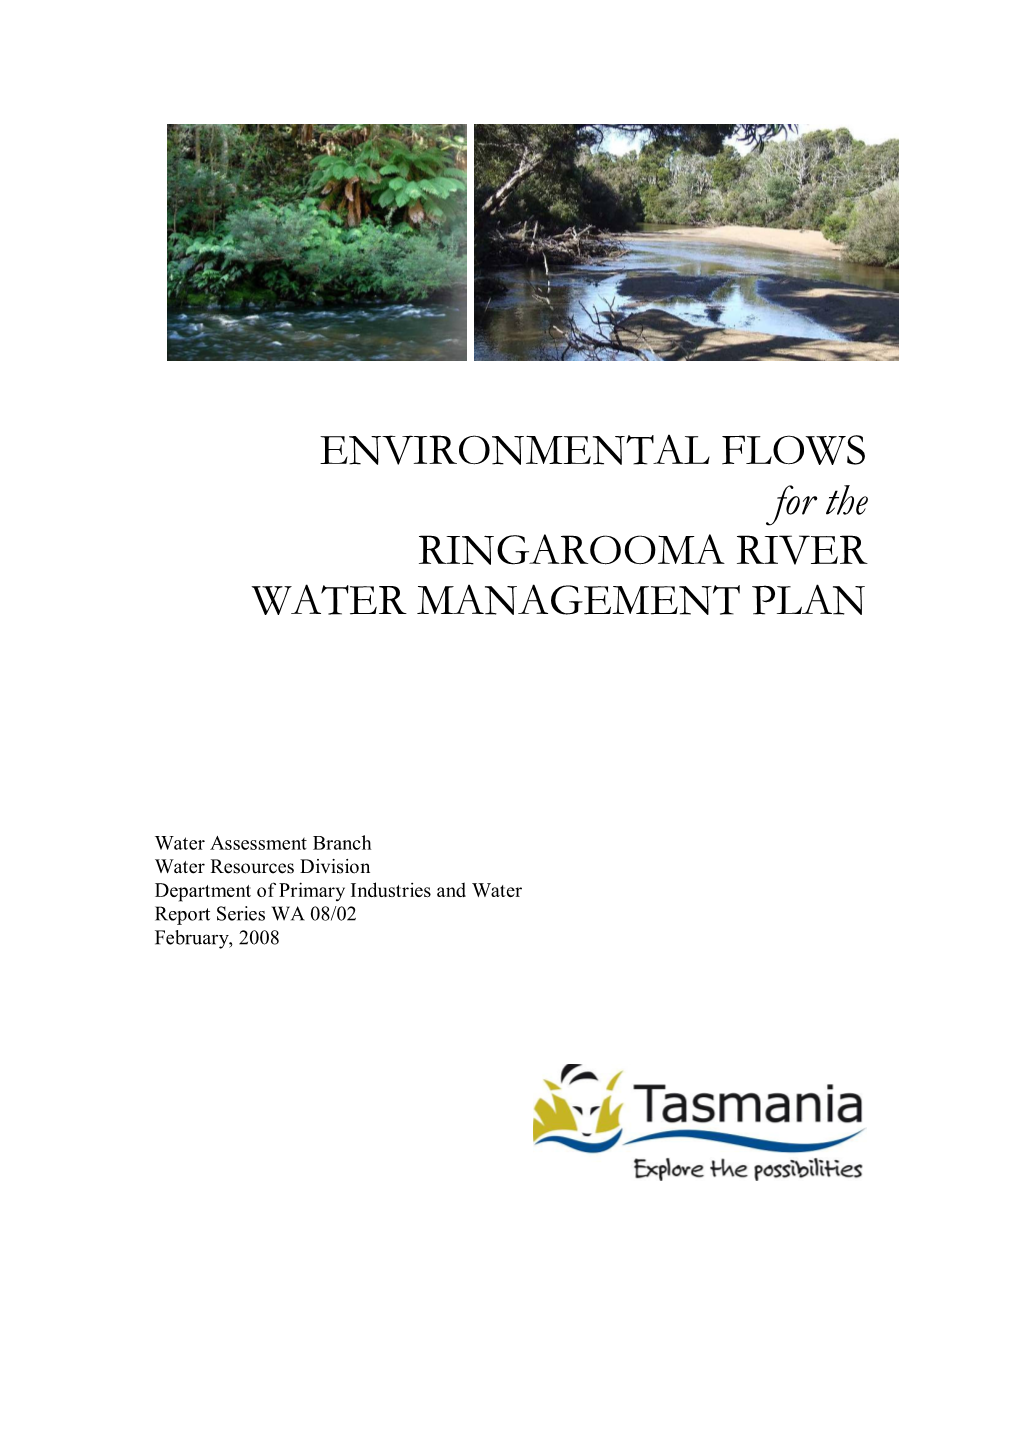 ENVIRONMENTAL FLOWS for the RINGAROOMA RIVER WATER MANAGEMENT PLAN